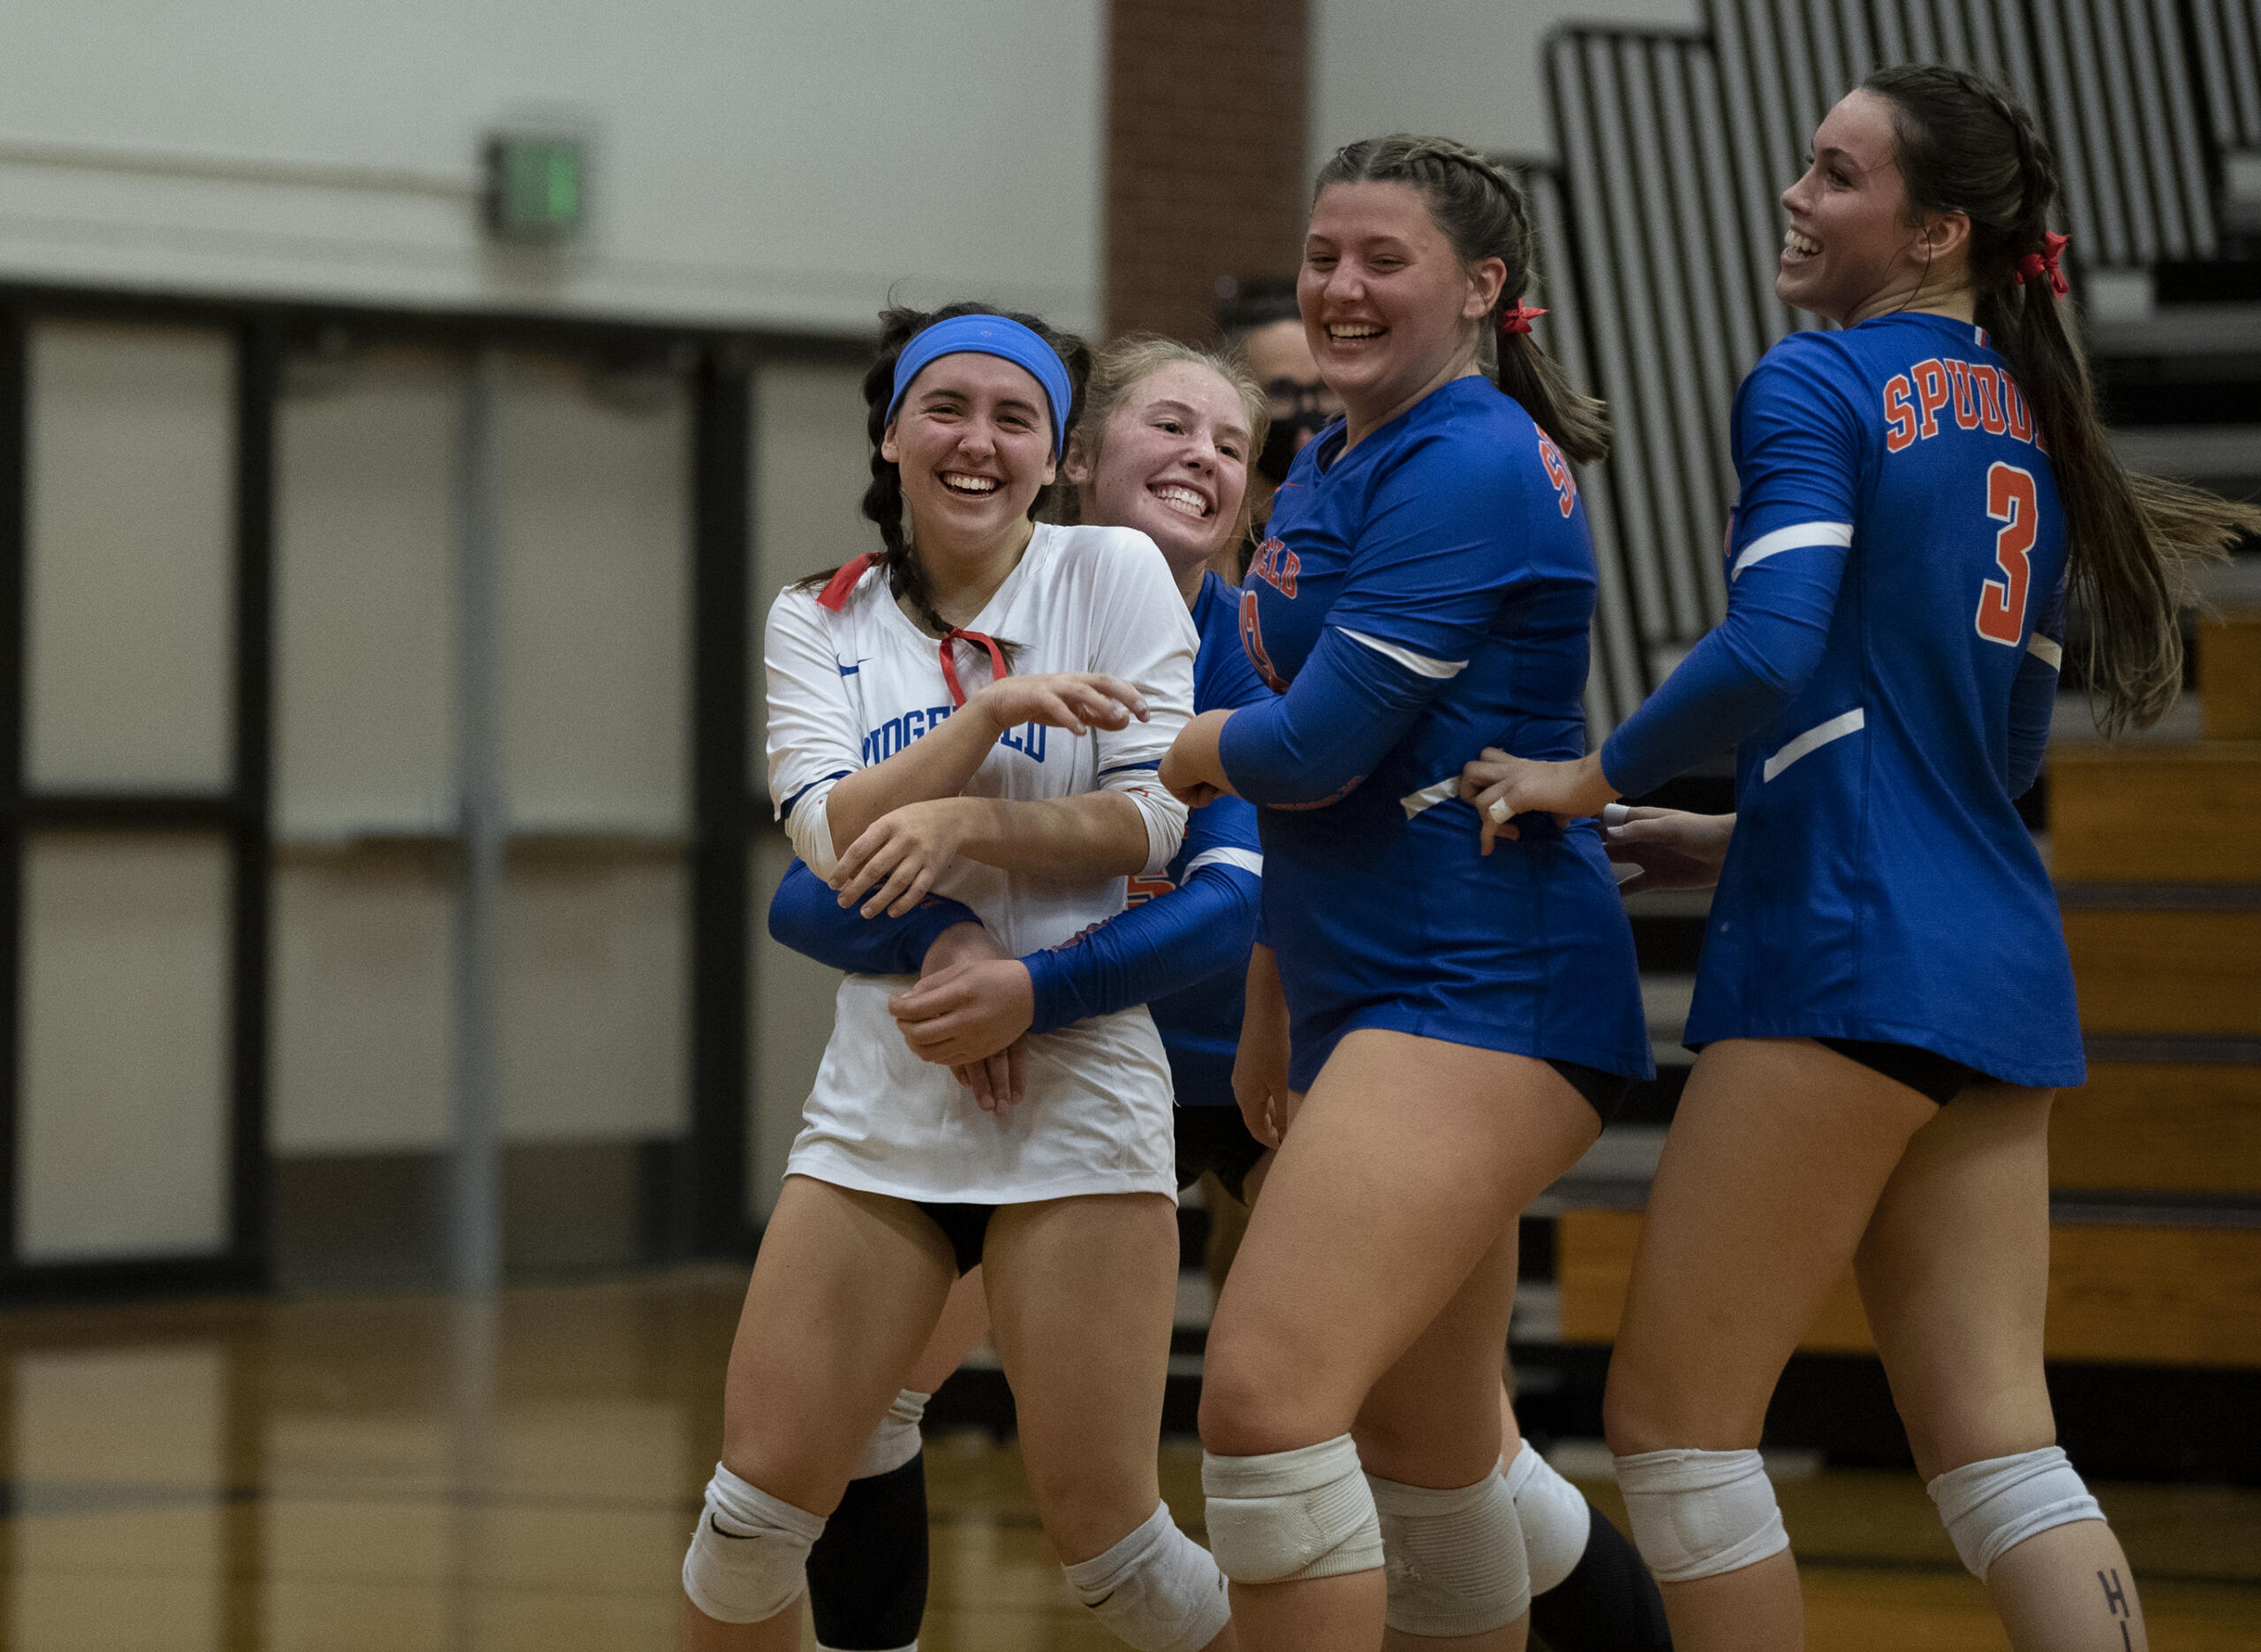 Ridgefield teammates swarm libero Emily Paul after her diving save kept the rally alive for a point the Spudders eventually won during a 2A Greater St. Helens League volleyball match on Tuesday, Sept. 21, 2021, at Columbia River High School. Ridgefield won 3-0.